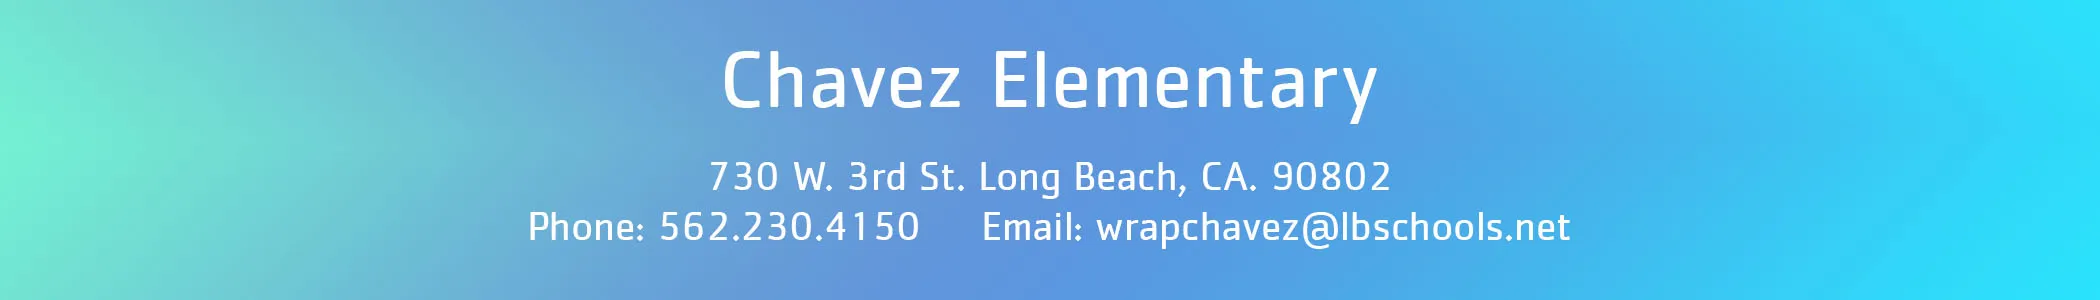 chavez banner with site information